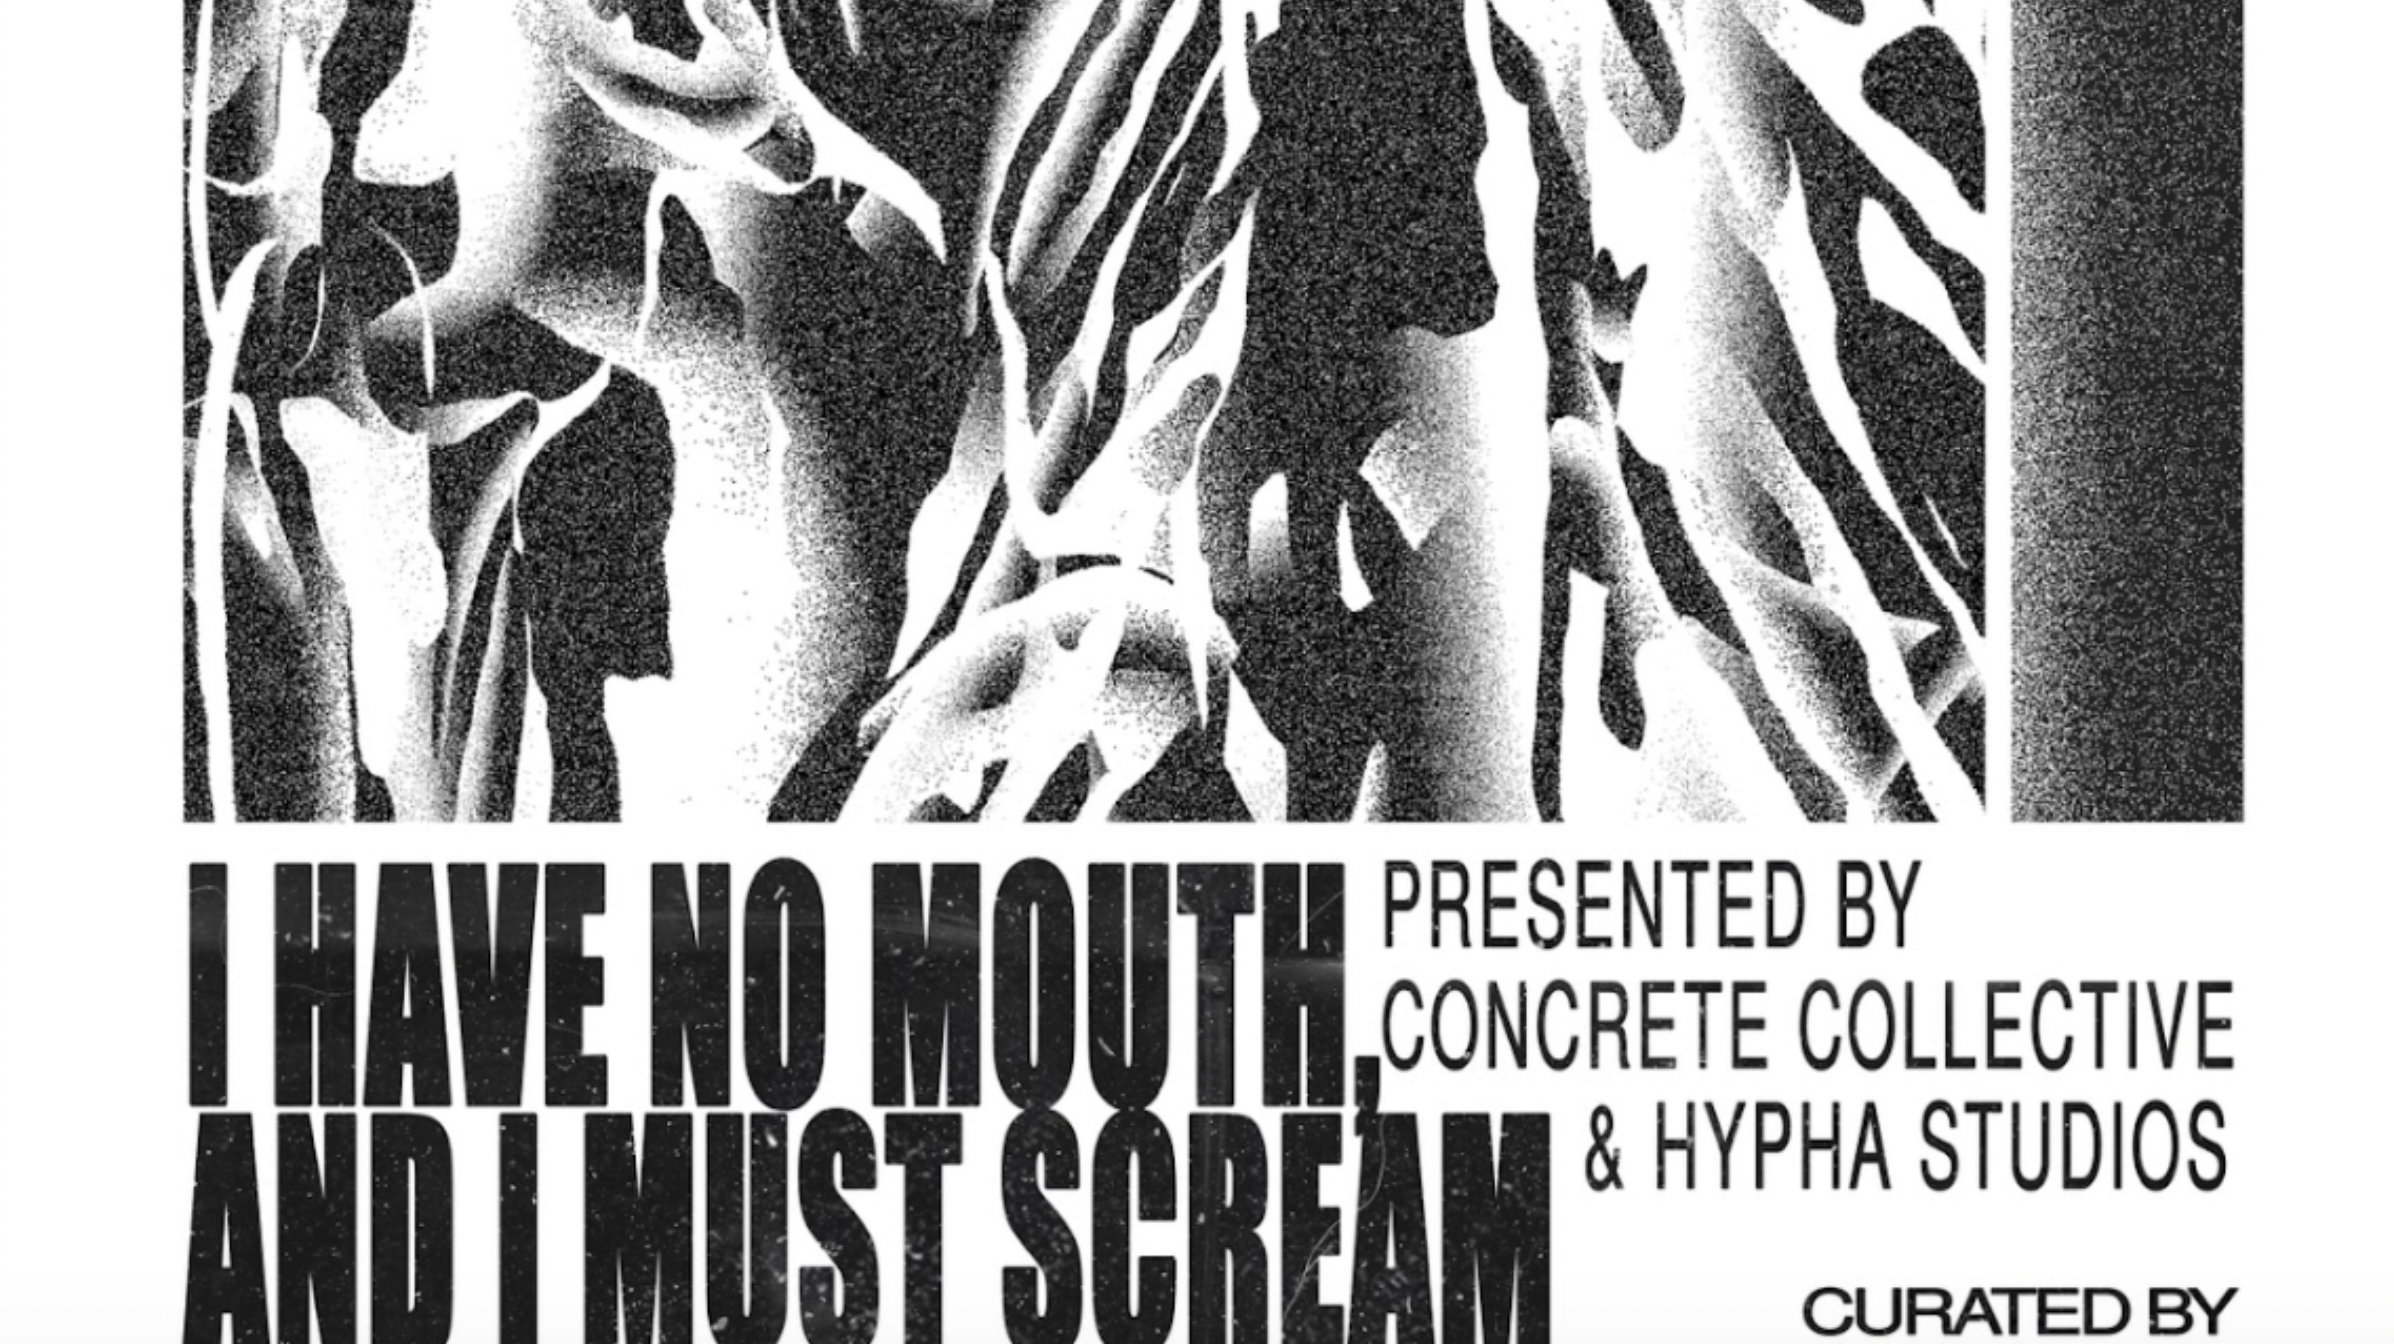 I Have No Mouth And I Must Scream curated by Concrete Collective